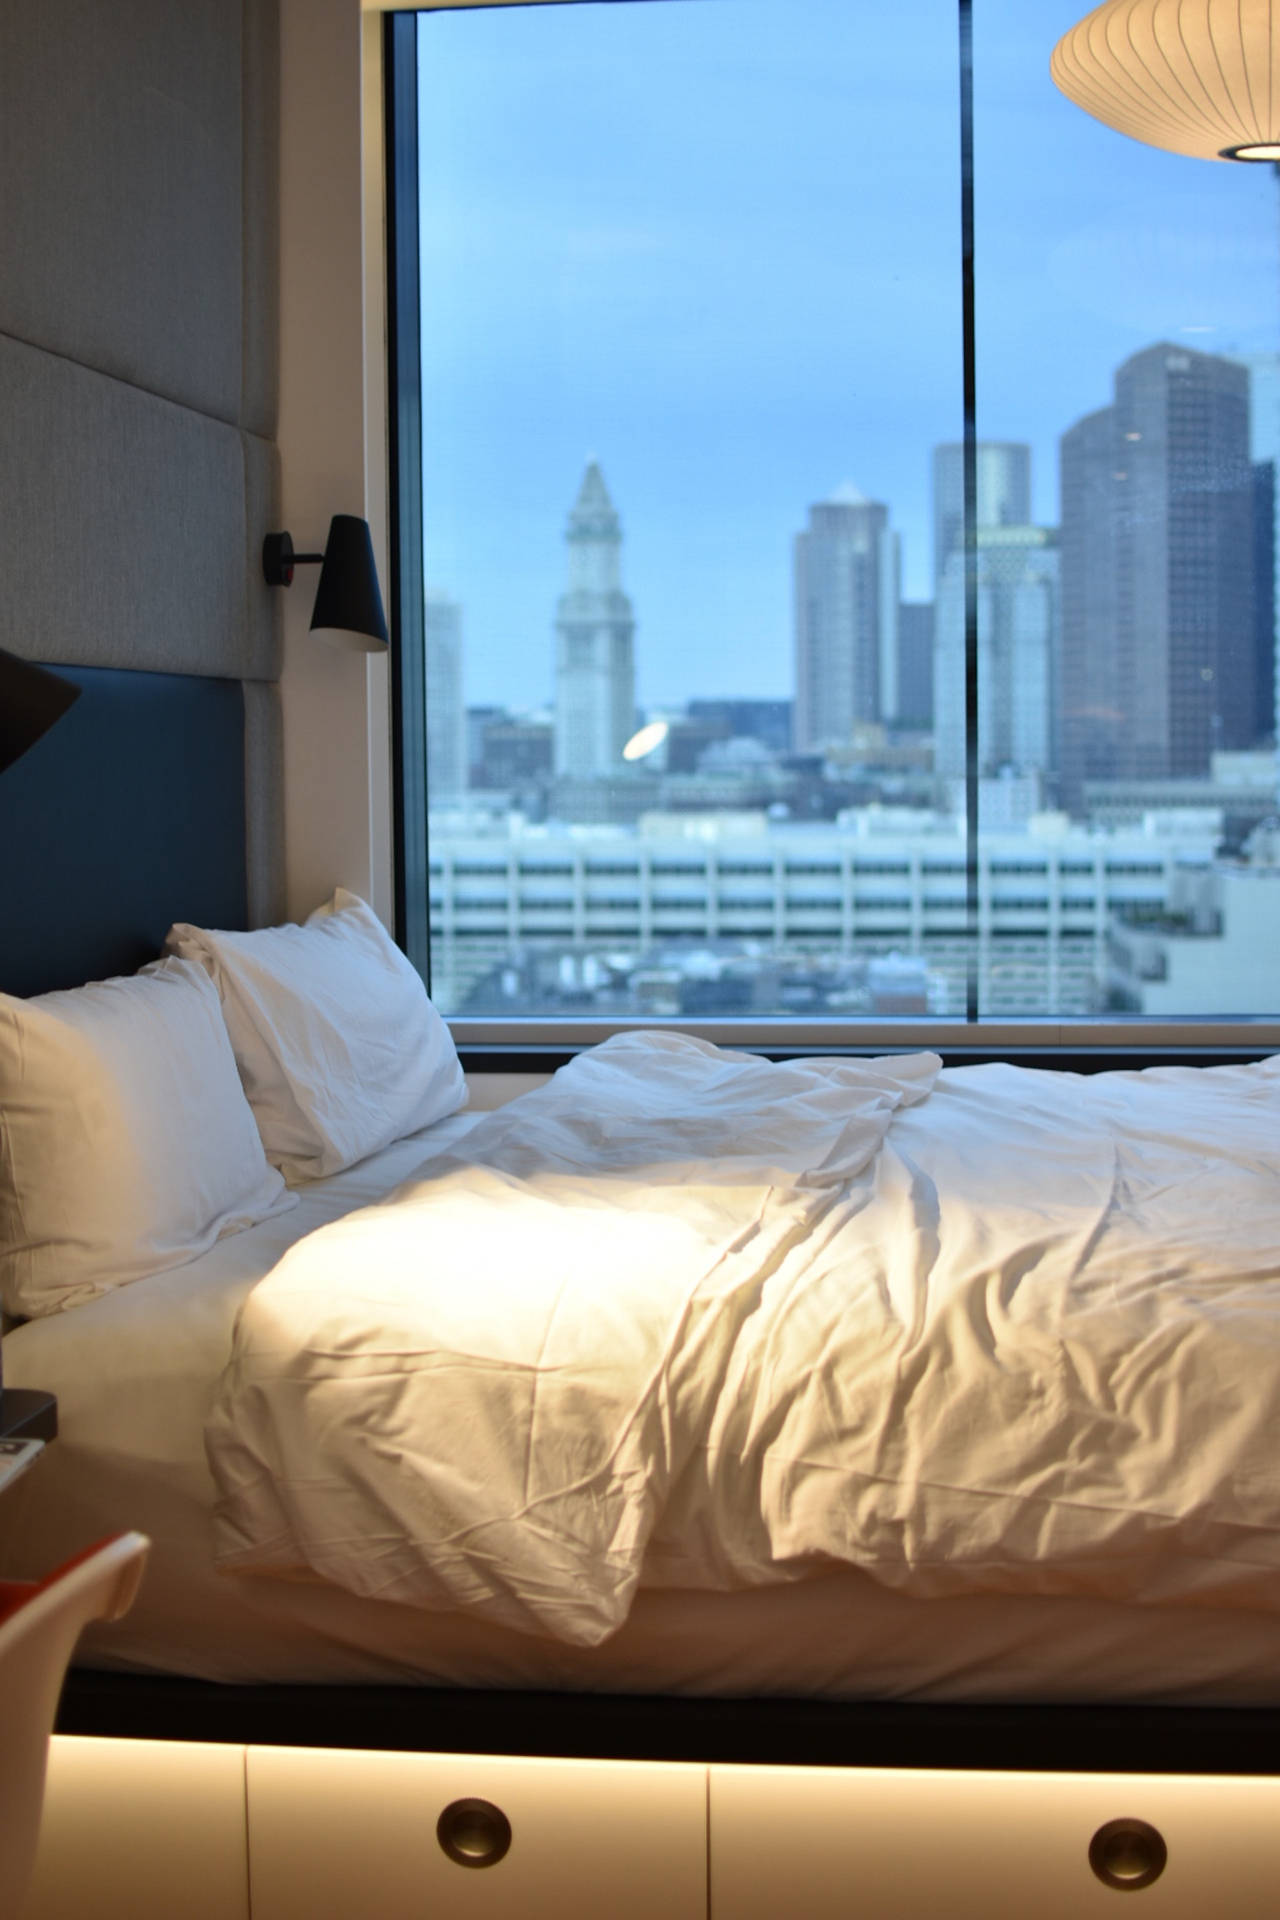 Hotel Bedroom With City View Wallpaper